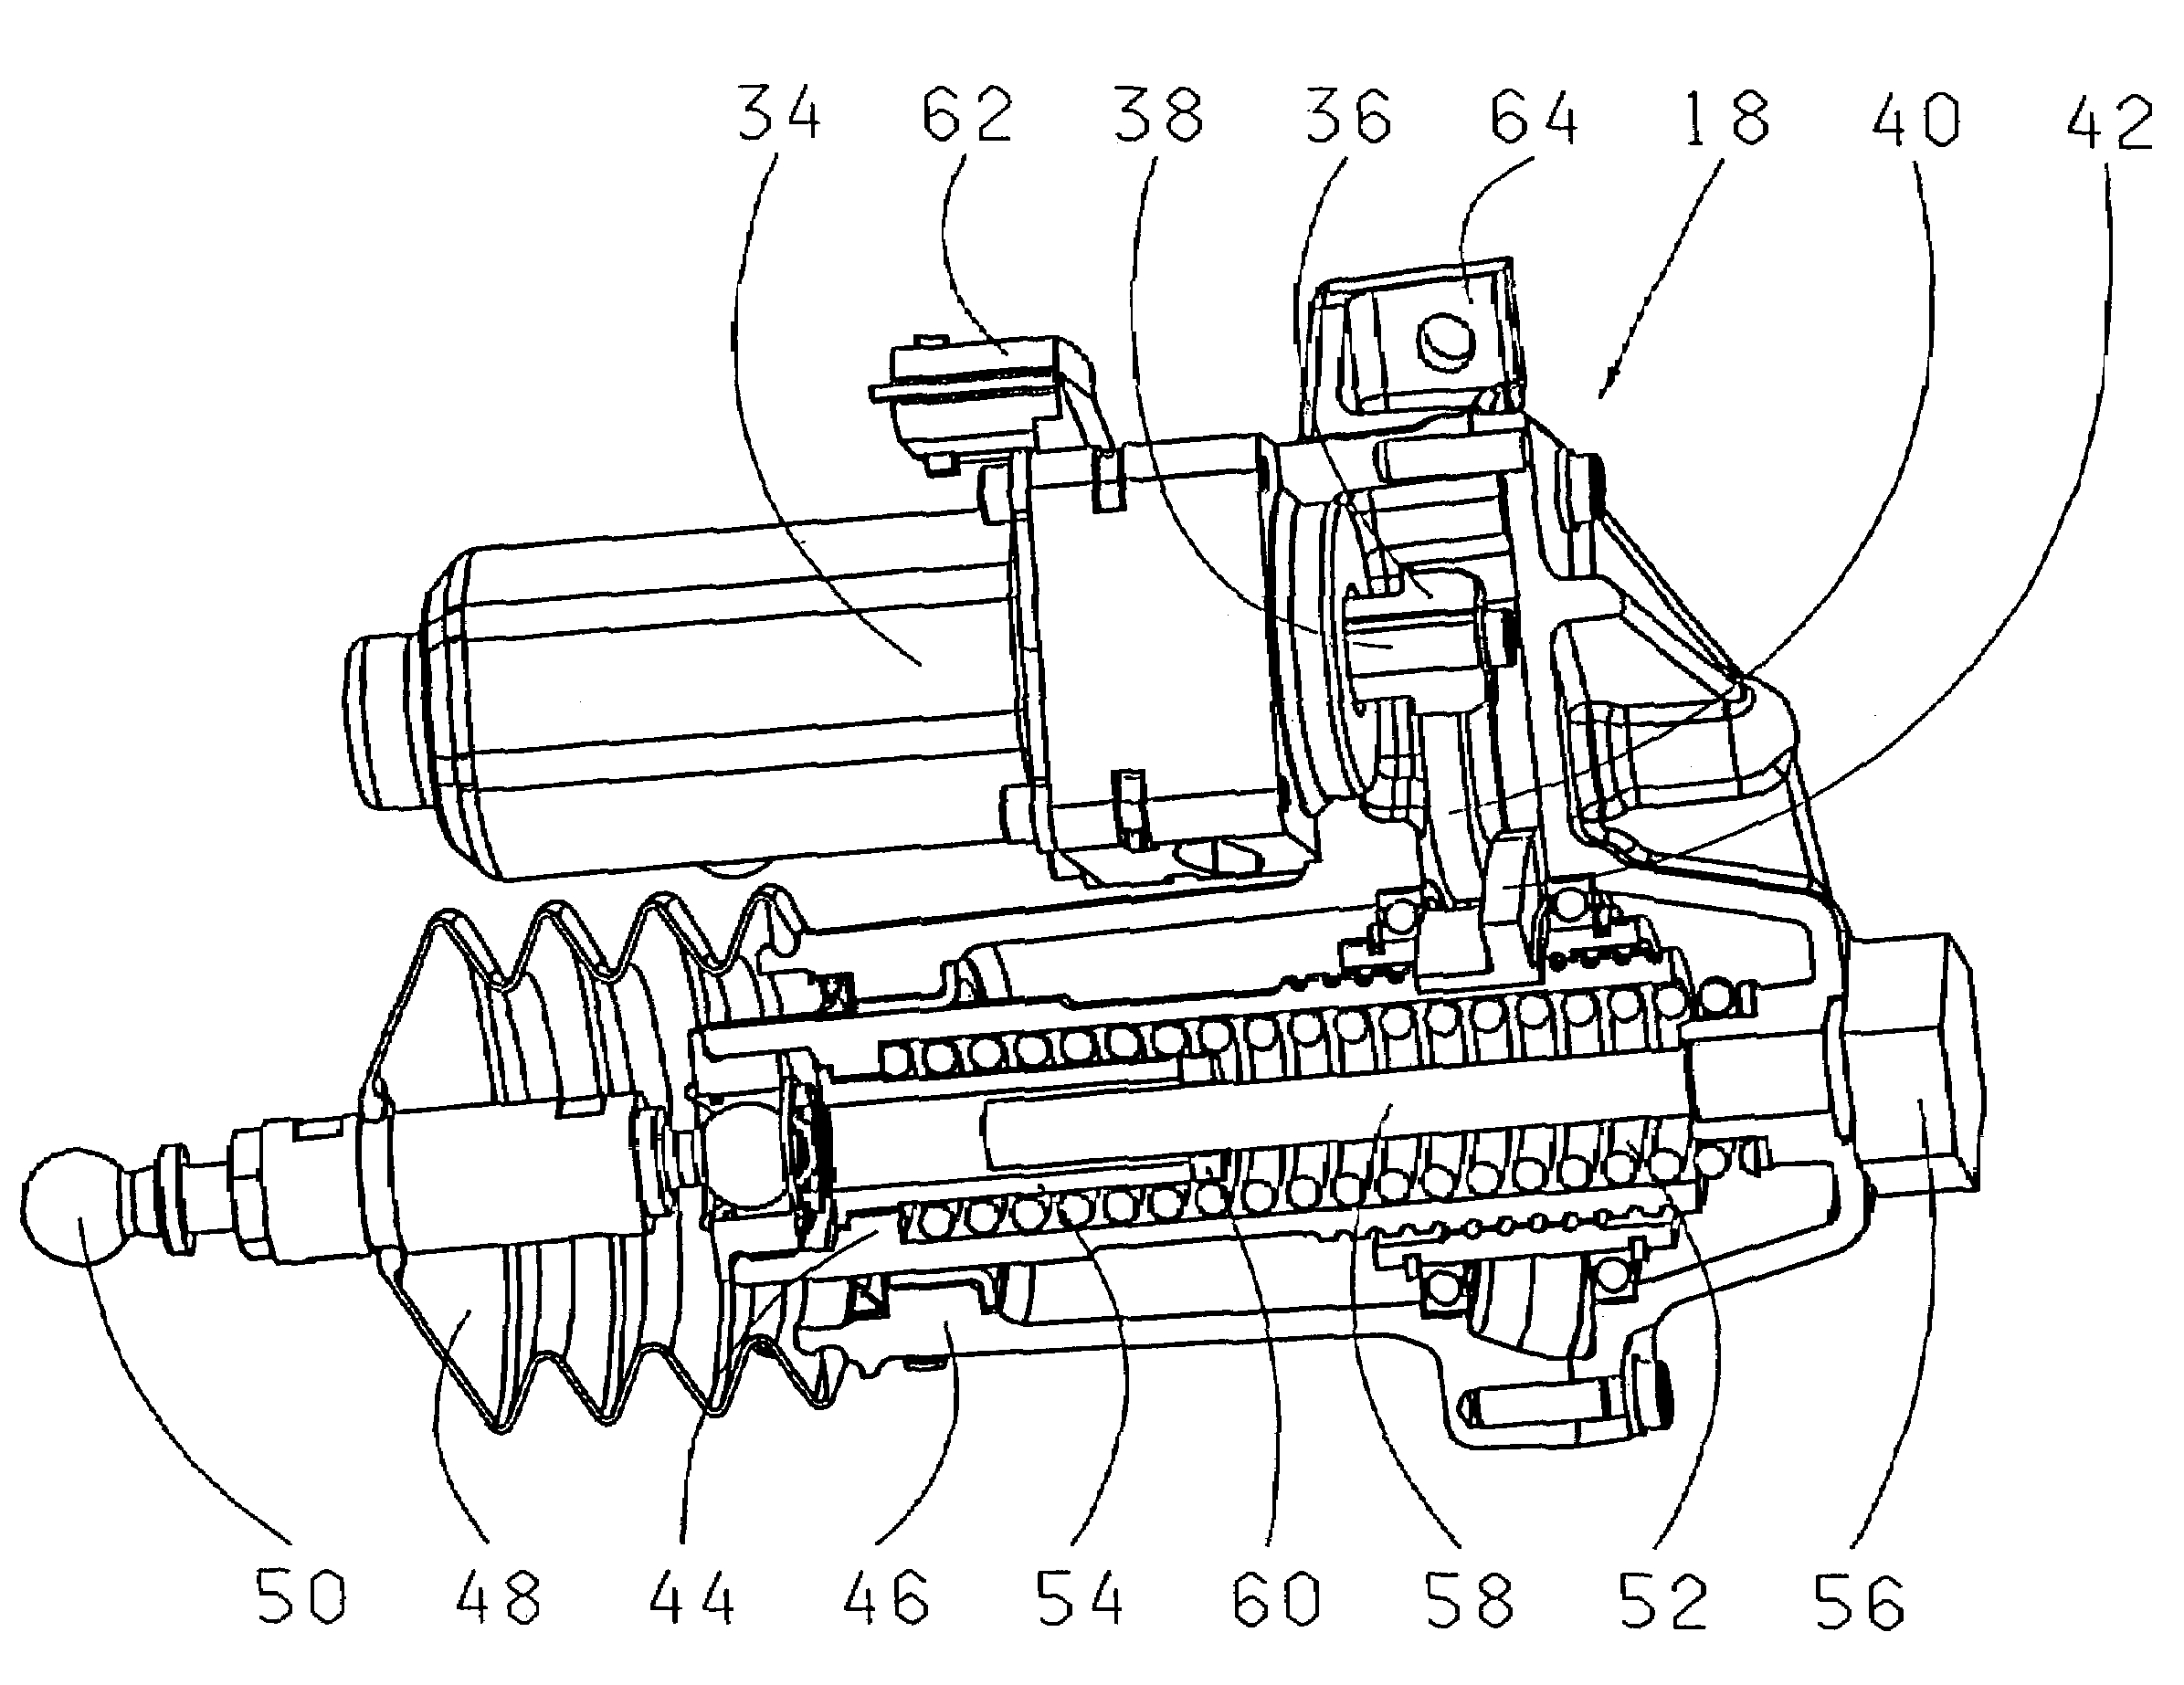 Actuating device for a clutch